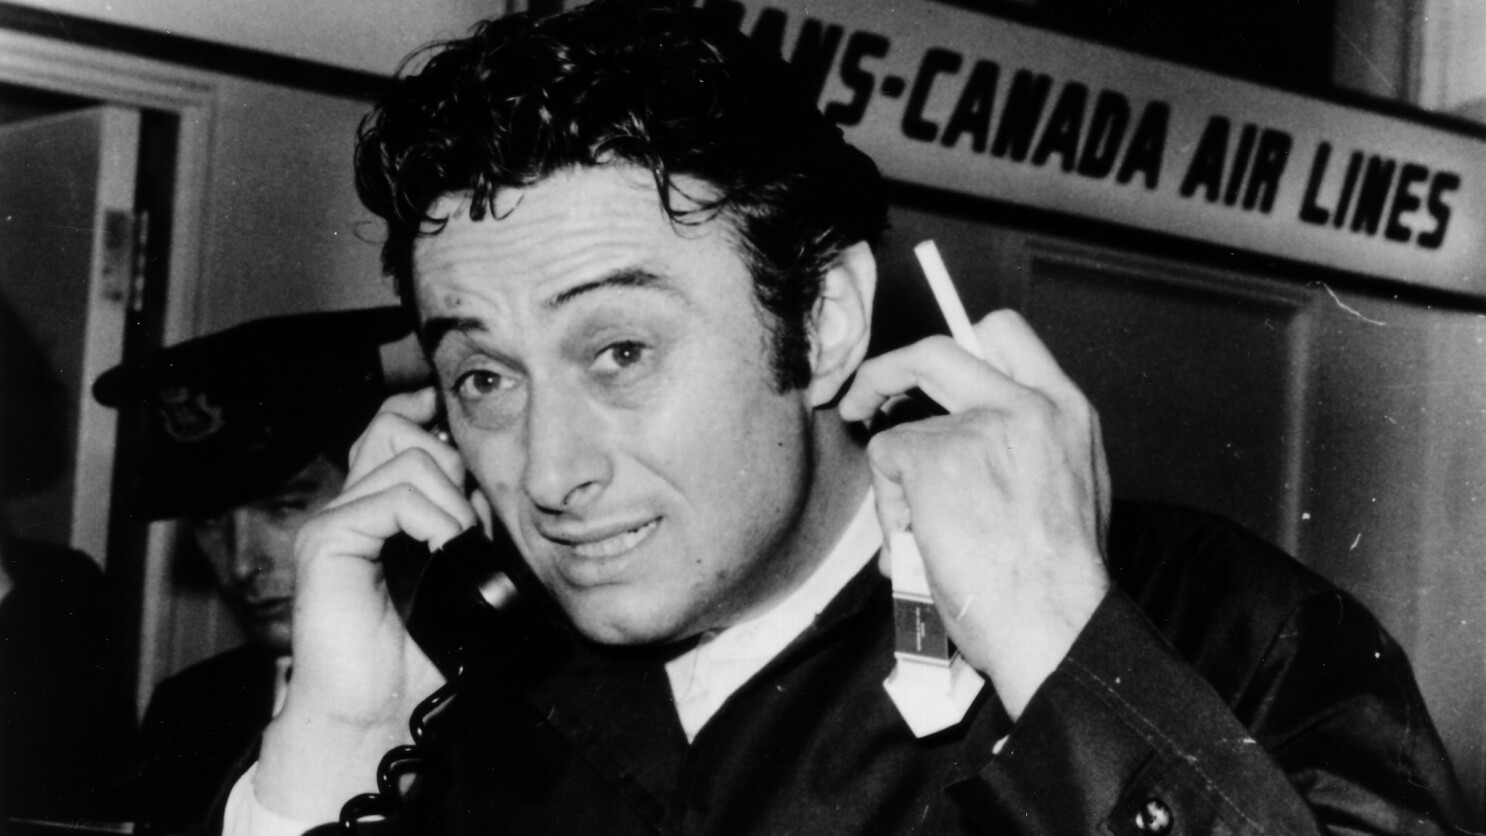 Remembering Lenny Bruce, 50 years after his death - Los Angeles Times